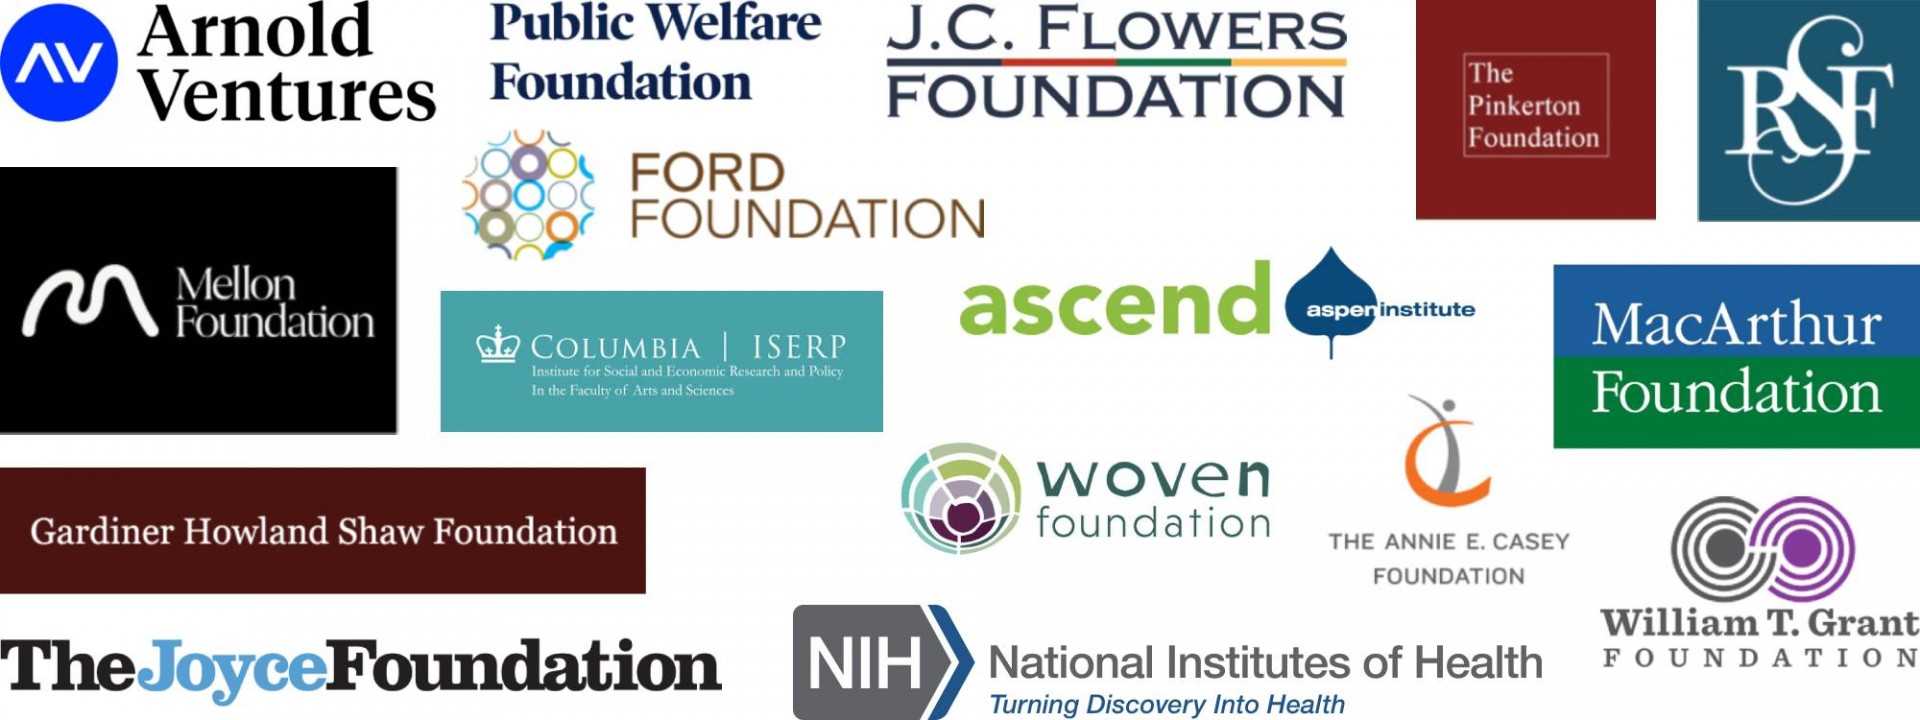 Arnold Ventures, Public Welfare Foundation, J.C. Flowers Foundation, The Pinkerton Foundation, Russell Sage Foundation, Mellon Foundation, Ford Foundation, Ascend at the Aspen Institute, MacArthur Foundation, Columbia ISERP, Gardiner Howland Shaw Foundation, Woven Foundation, The Anne E. Casey Foundation, The Joyce Foundation, National Institutes of Health, William T. Grant Foundation